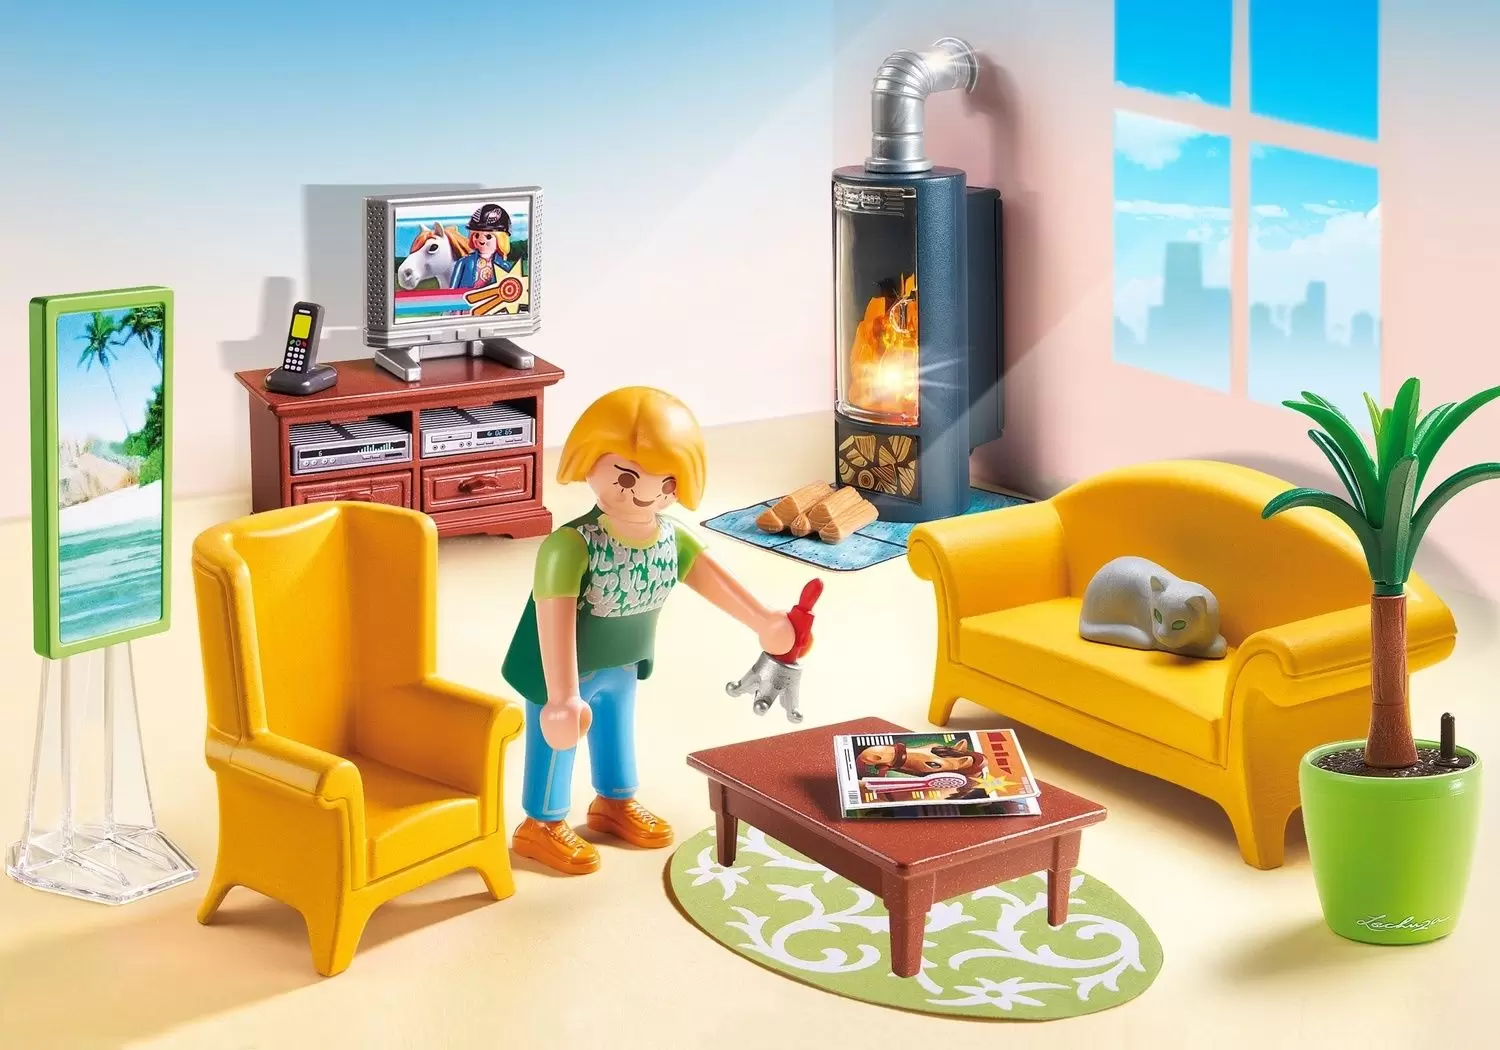 Playmobil Houses and Furniture - Living Room with Fireplace